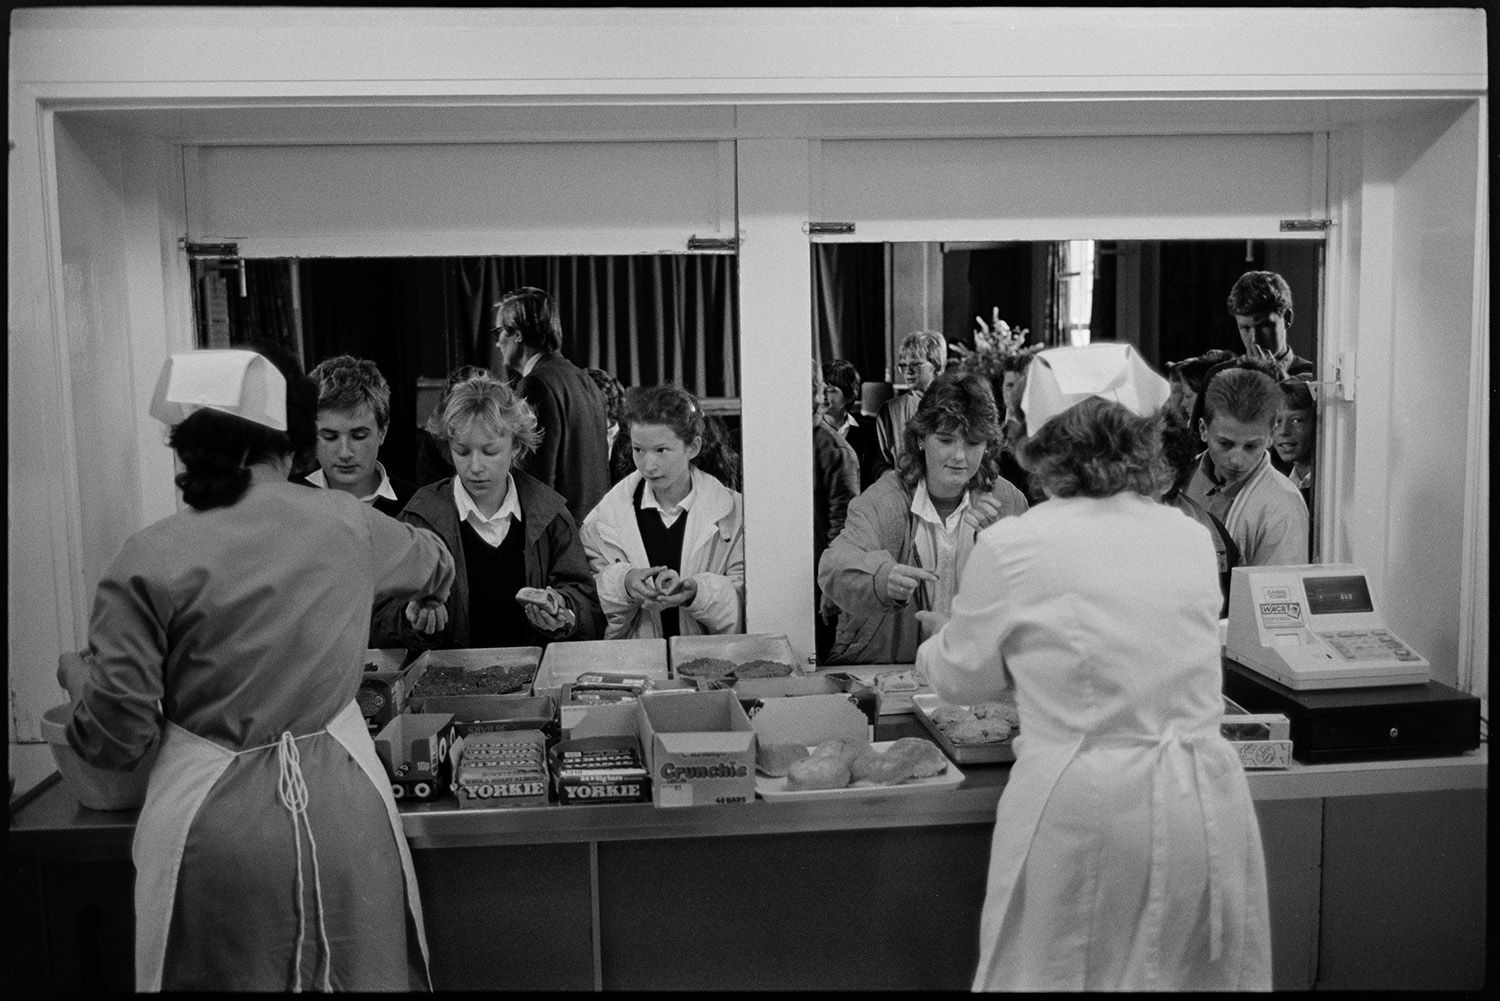 Women serving food in school canteen. 
[Two women serving food to students in the canteen at Chulmleigh Community College. Chocolate bars, pastries and a till are on the counter behind the hatch.]